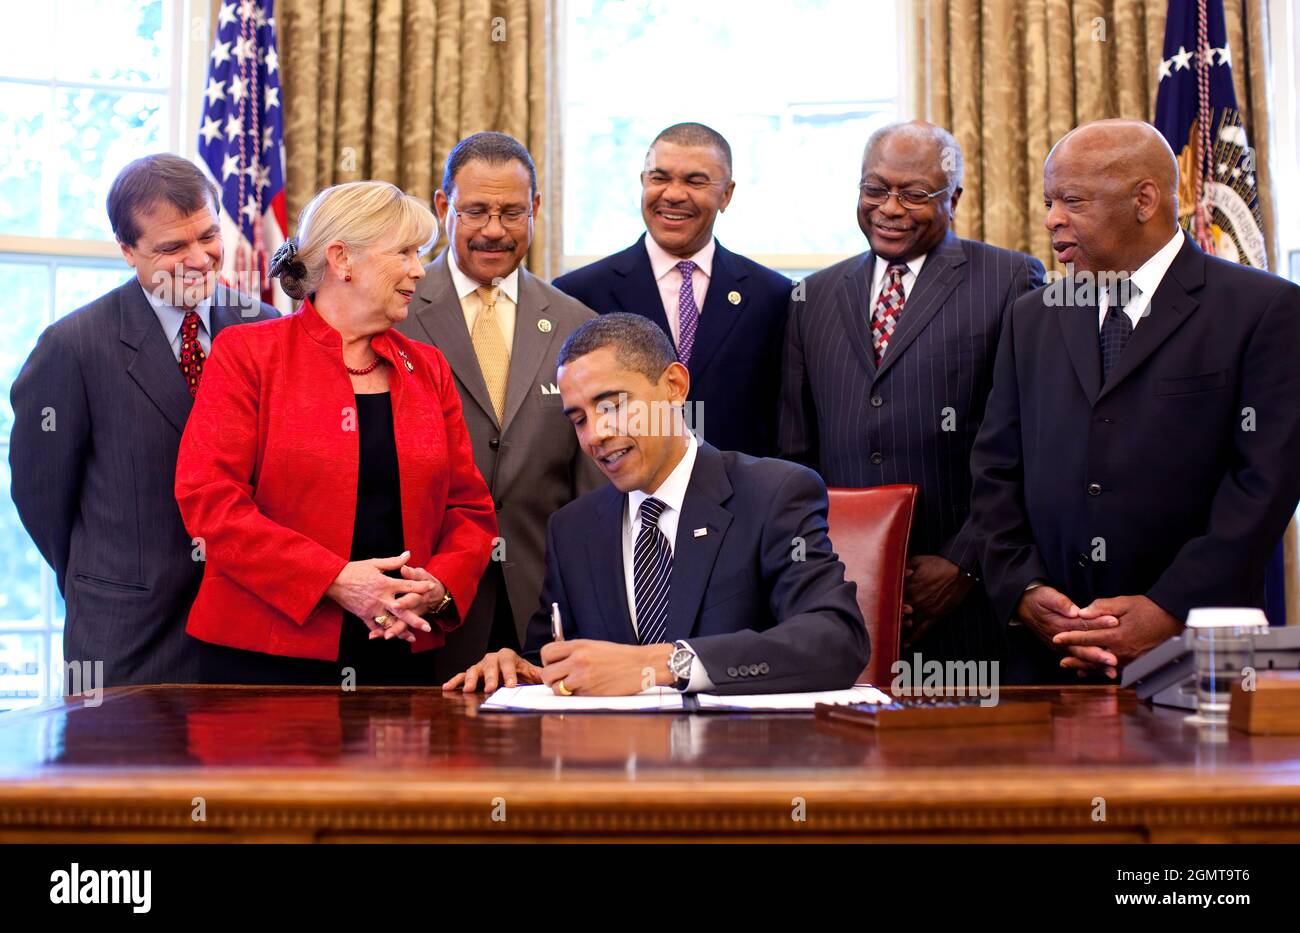 President Barack Obama signs the Civil Rights History Project Act bill into law in the Oval Office of the White House Tuesday, May 12, 2009.  With President Obama are from left: Rep. Mike Quigley (D-IL); Rep. Carolyn McCarthy (D-NY); Rep. Sanford Bishop (D-GA); Rep. Lacy Clay (D-MO); Rep. Jim Clyburn (D-SC) and Rep. John Lewis (D-GA).   Official White House Photo by Pete Souza. Stock Photo